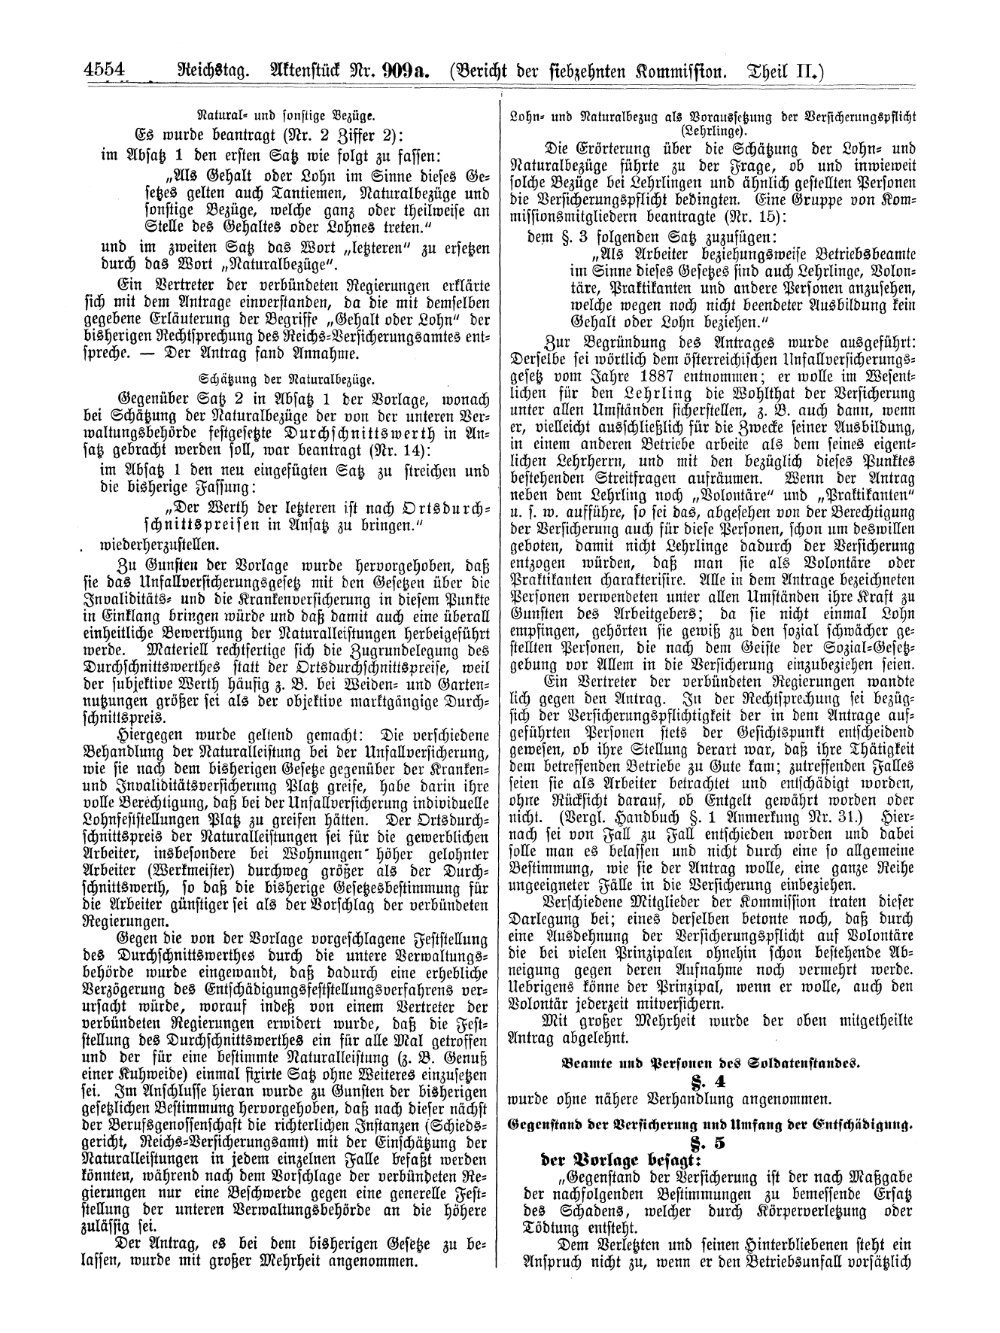 Scan of page 4554